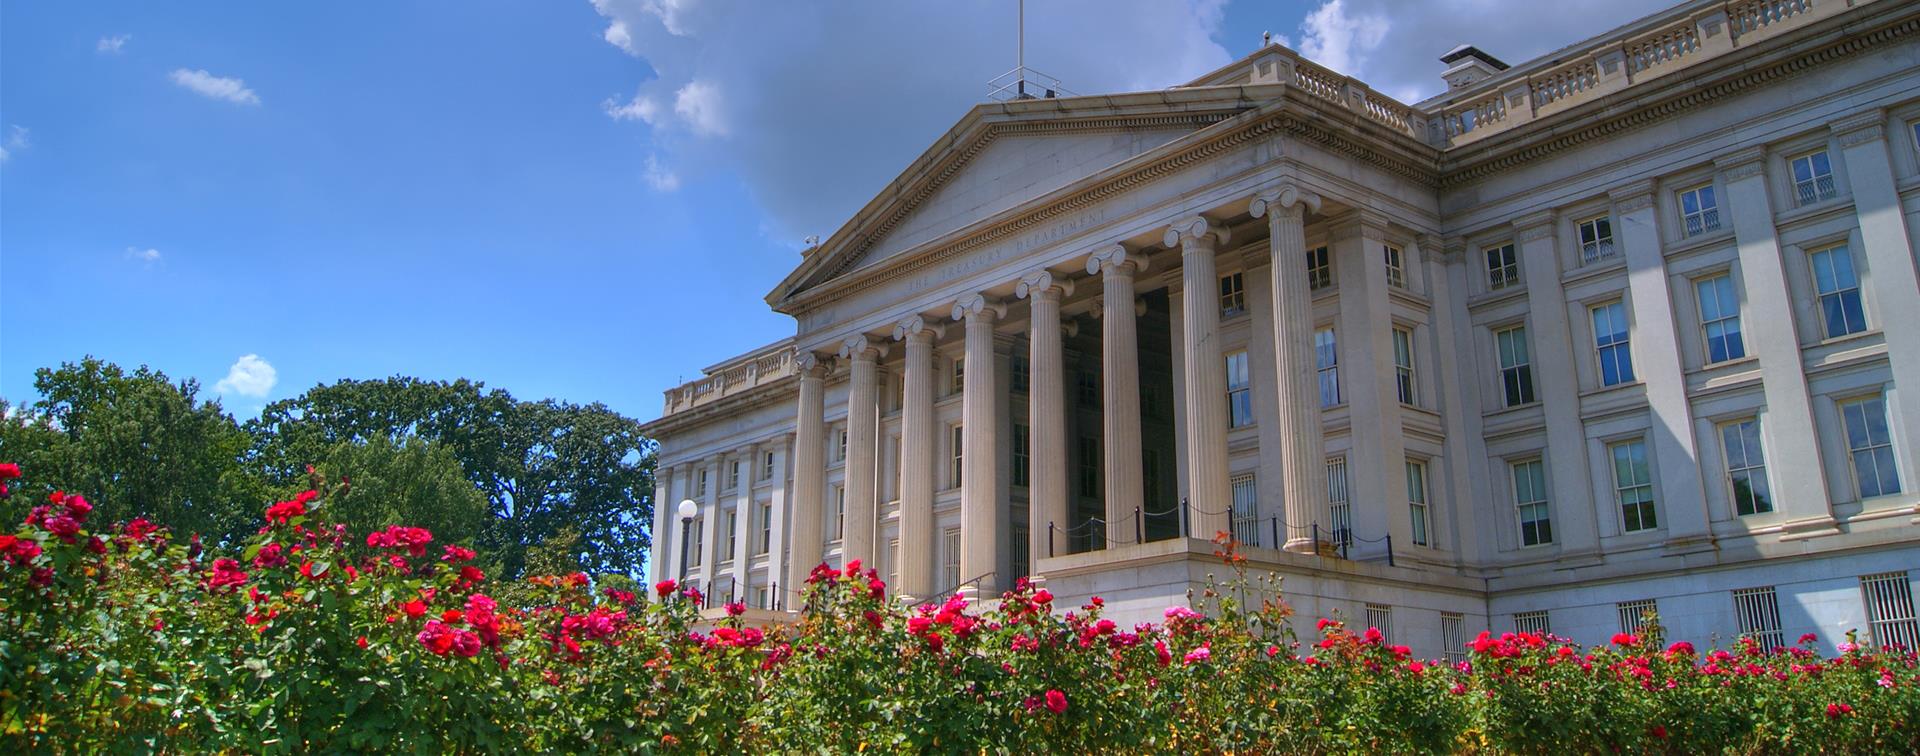 Picture of the US Treasury building with red flowers lining the bottom of the image.